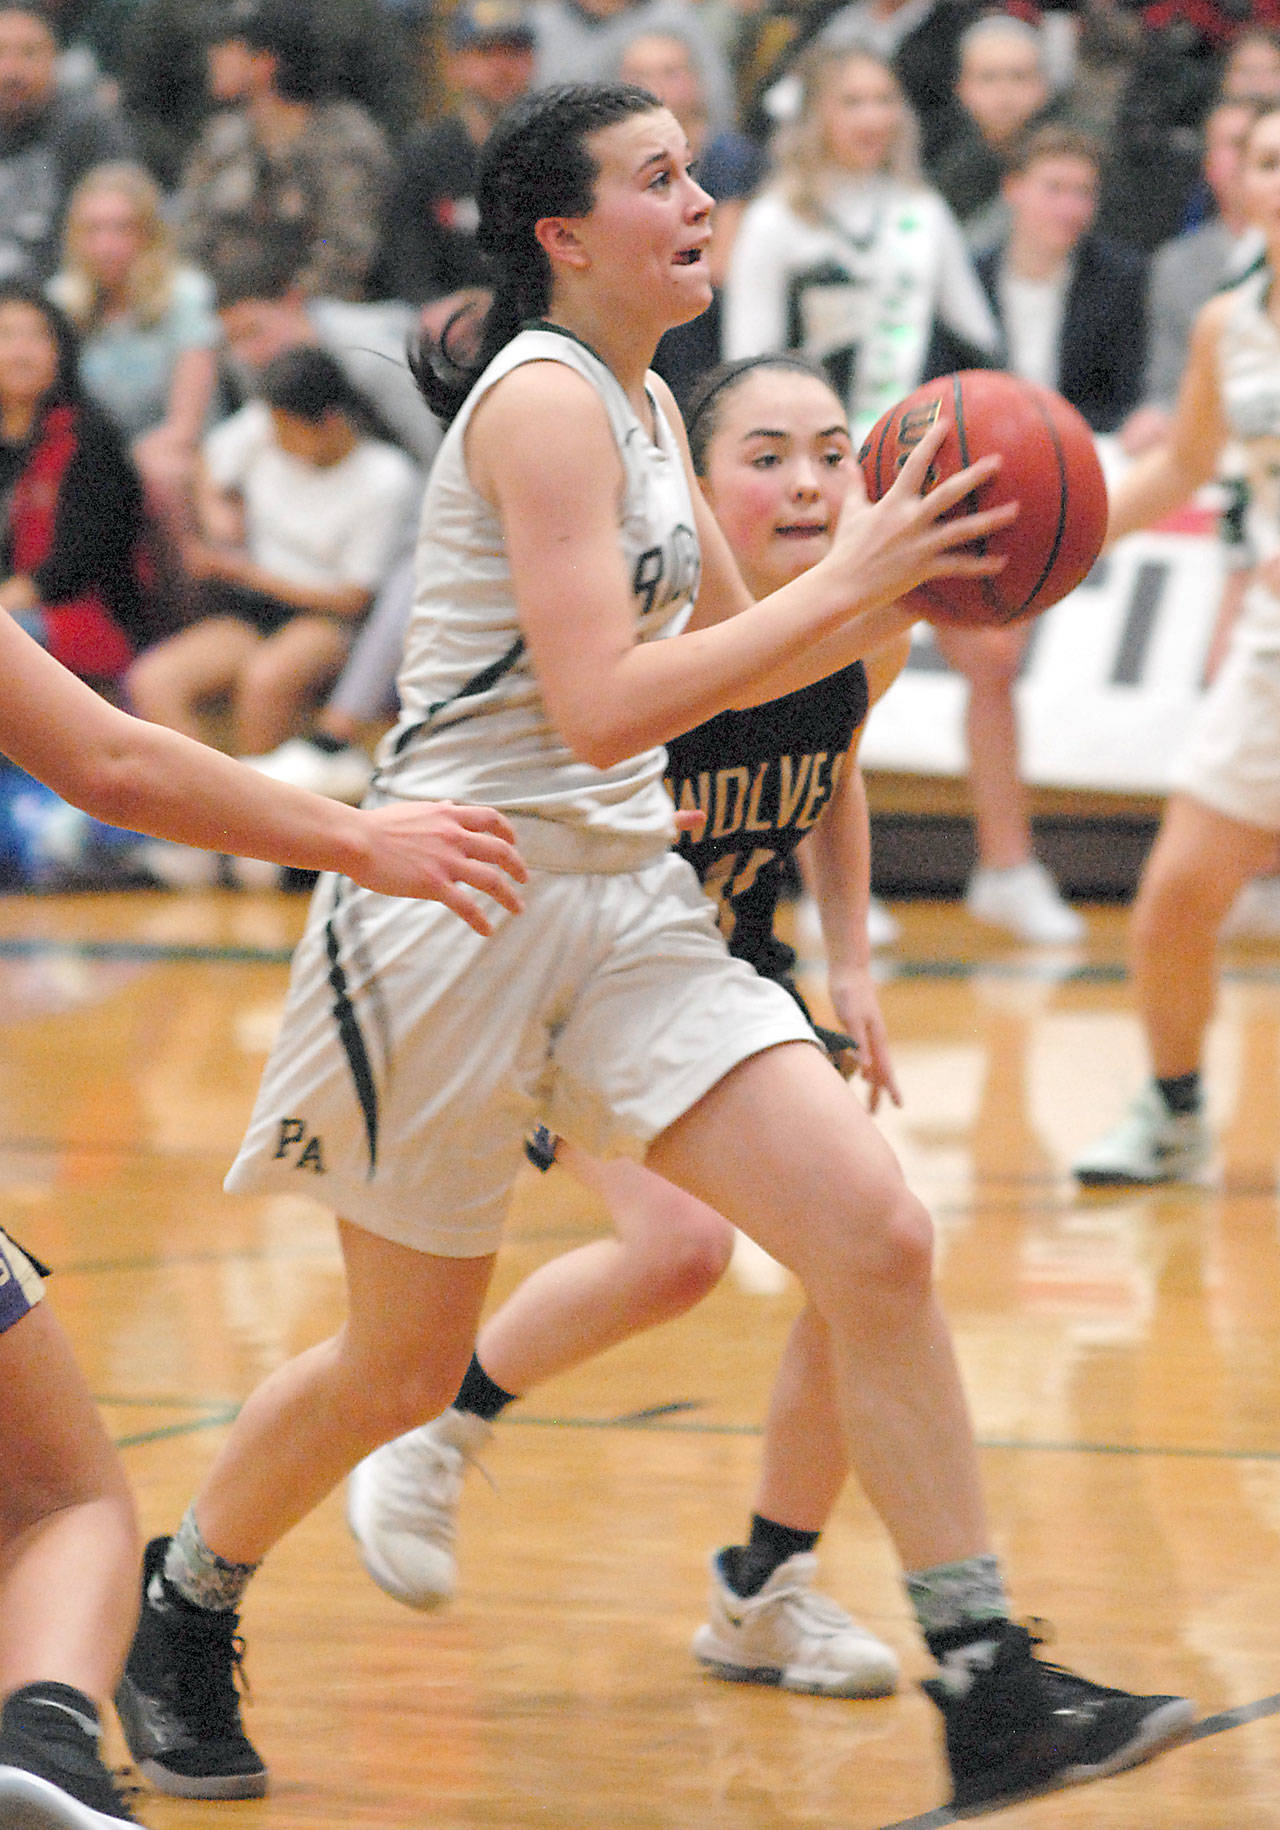 Port Angeles sophomore Bailee Larson, front, has improved as a defender, rebounder and scoring option for the Roughriders this season. (Keith Thorpe /Peninsula Daily News)